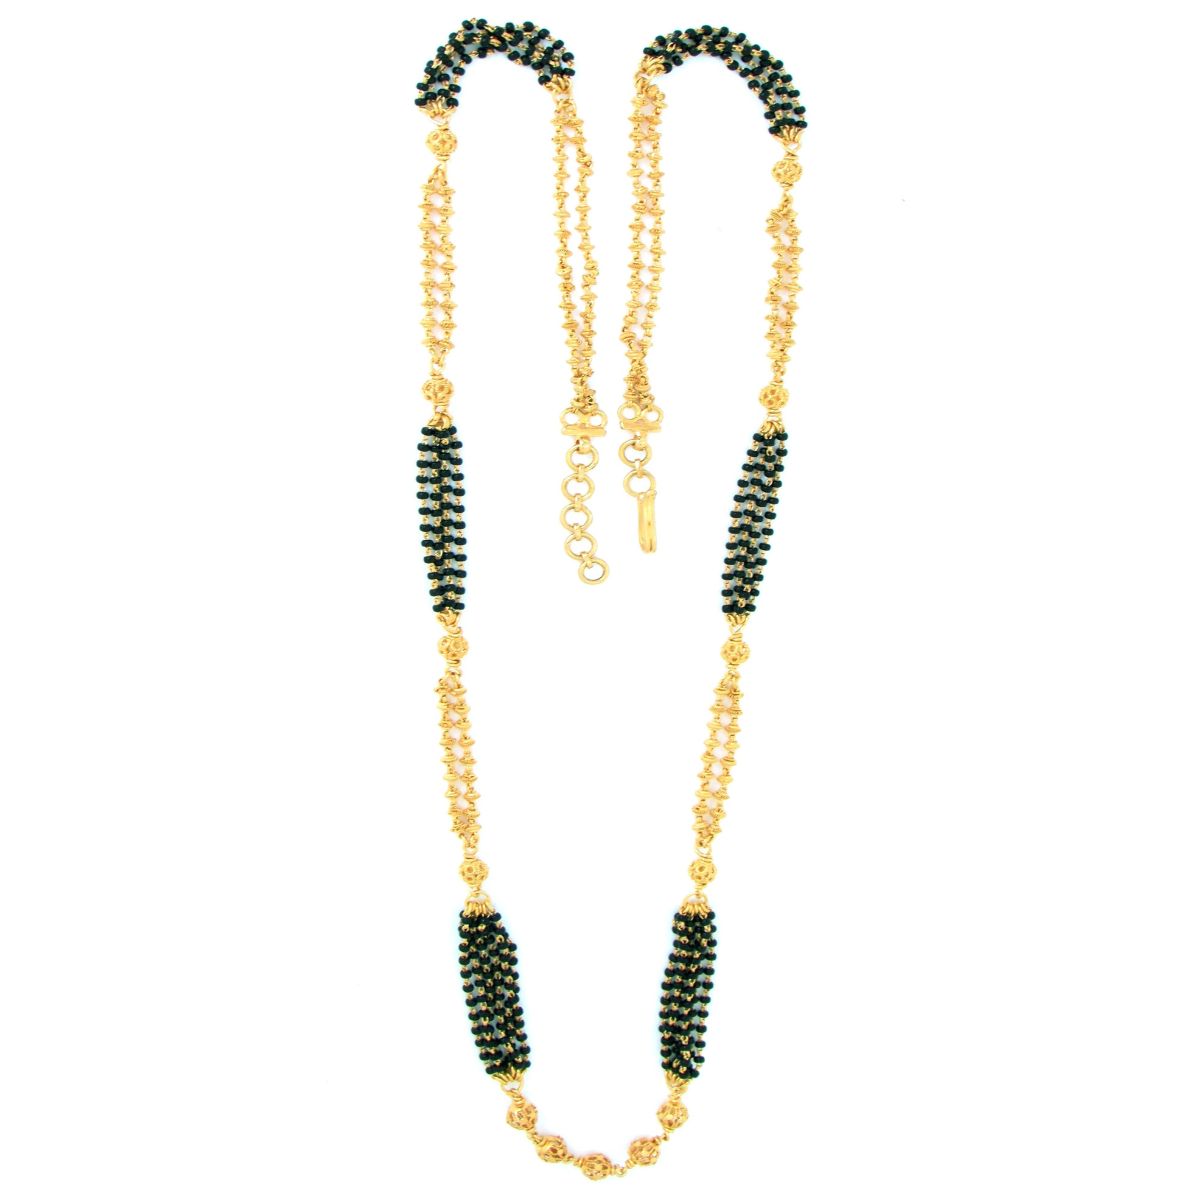 Temple Gold Necklace with Black Beads.